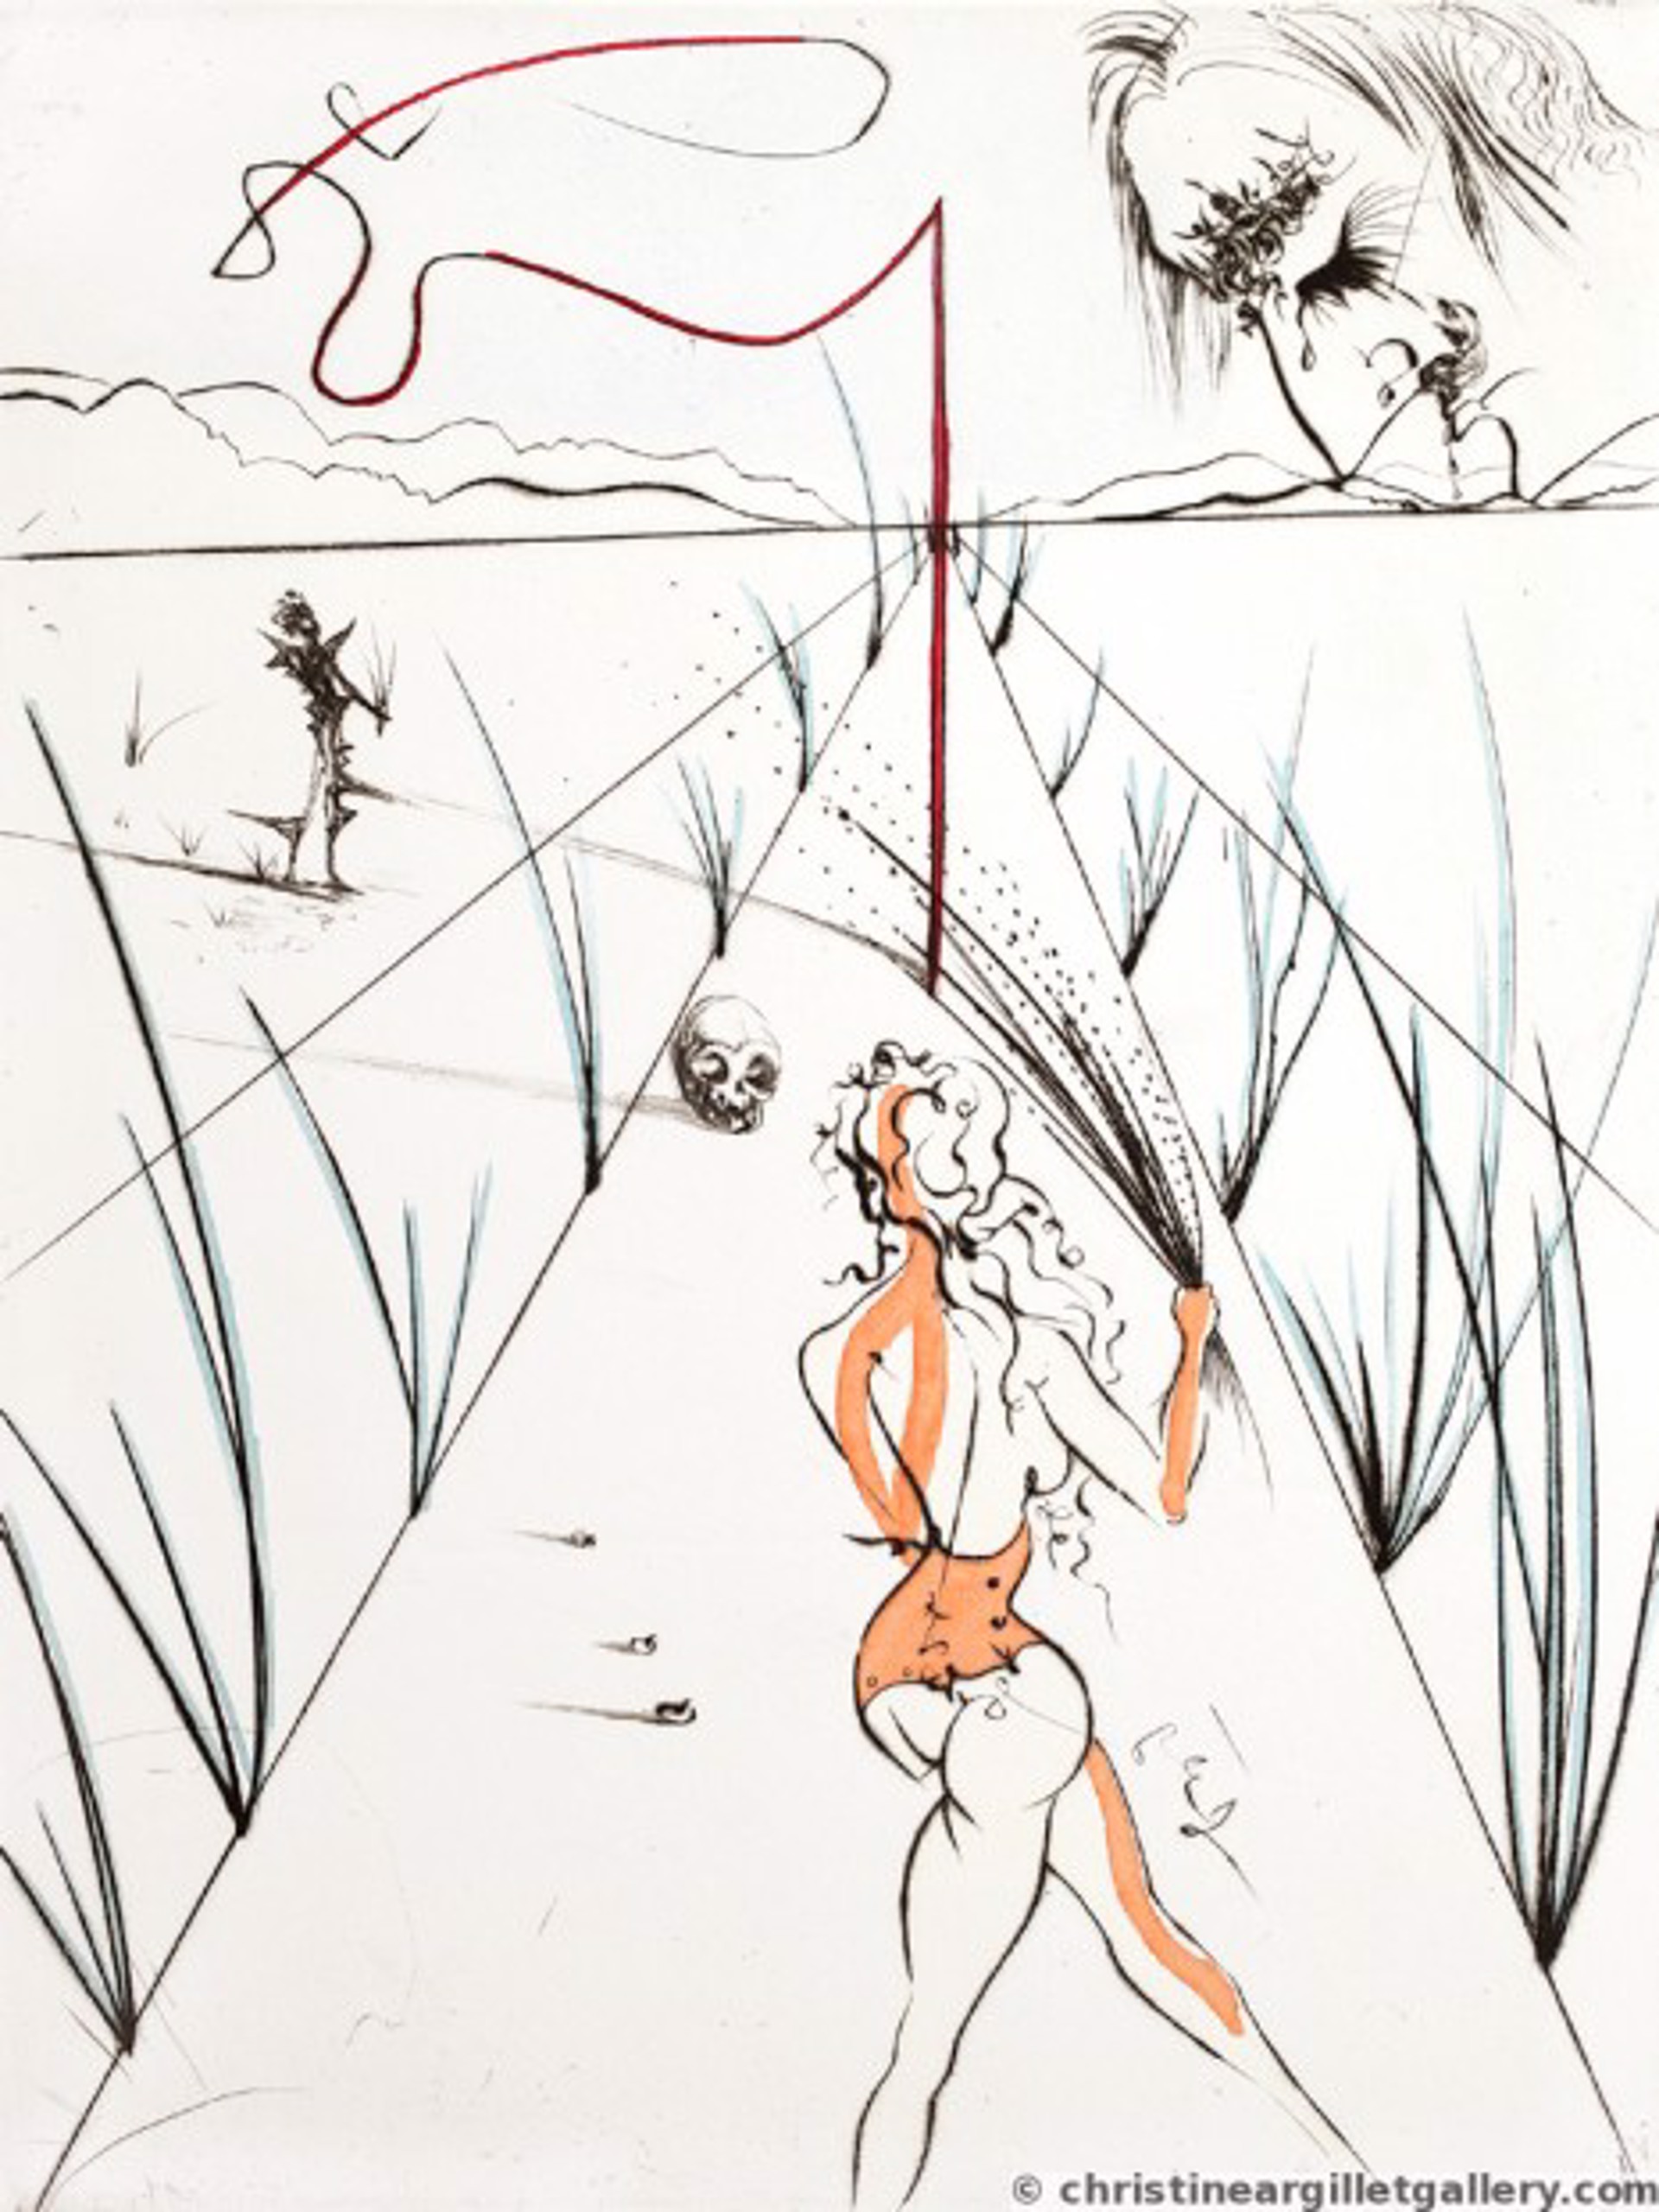 Venus in Furs  "Whips Alley" by Salvador Dali